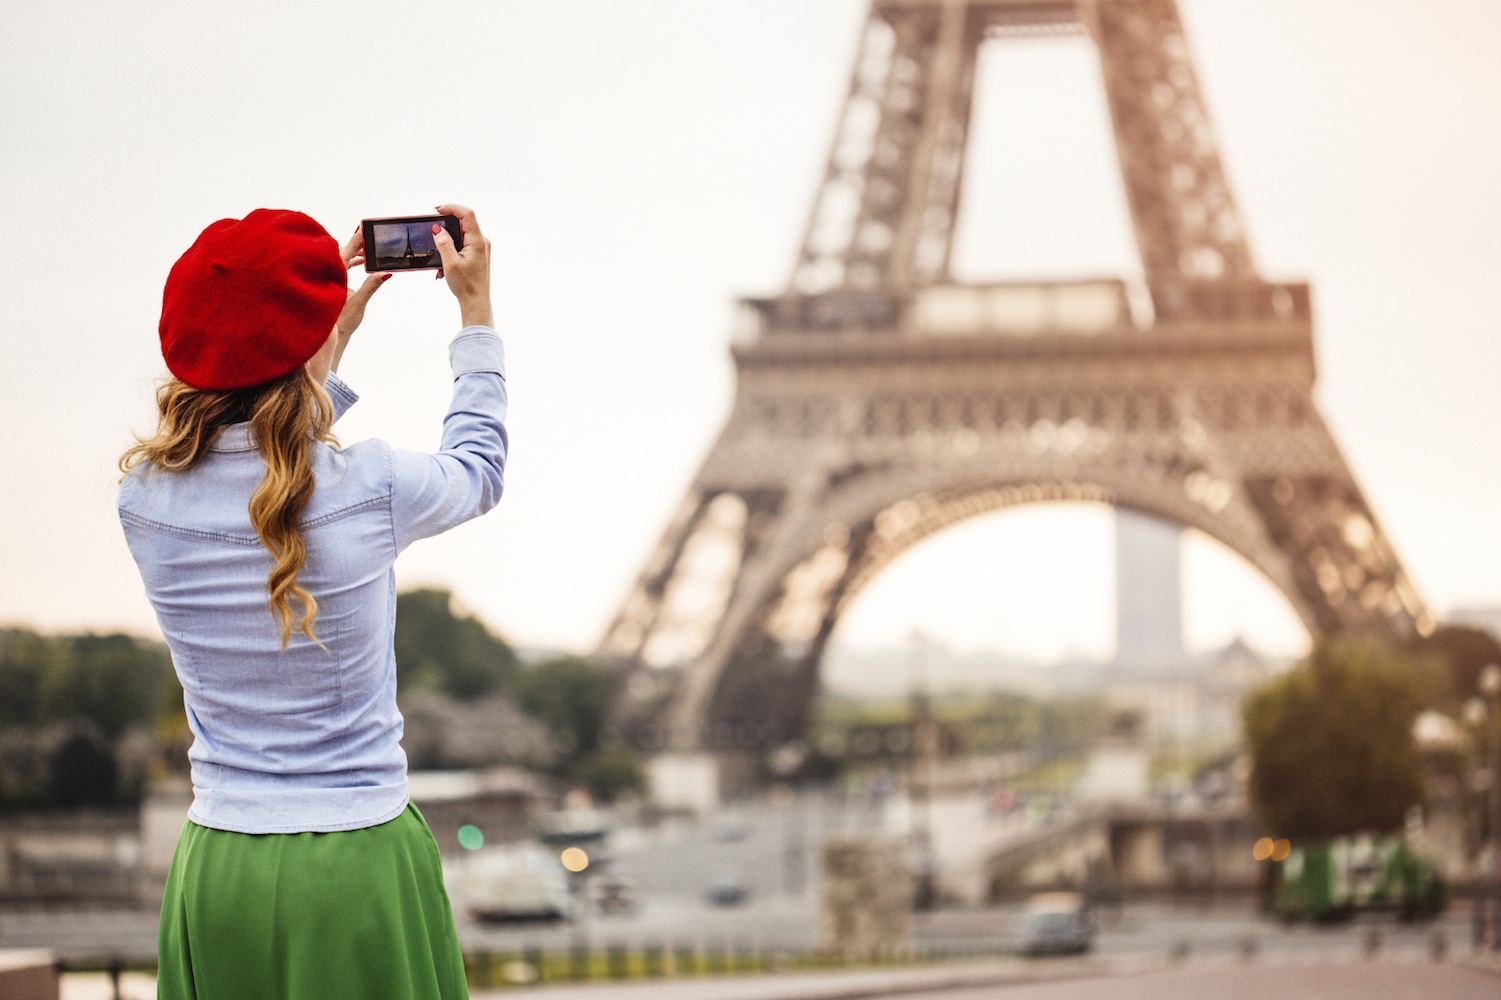 7 Pro-Tips To Avoid Looking Like A Tourist While You Travel